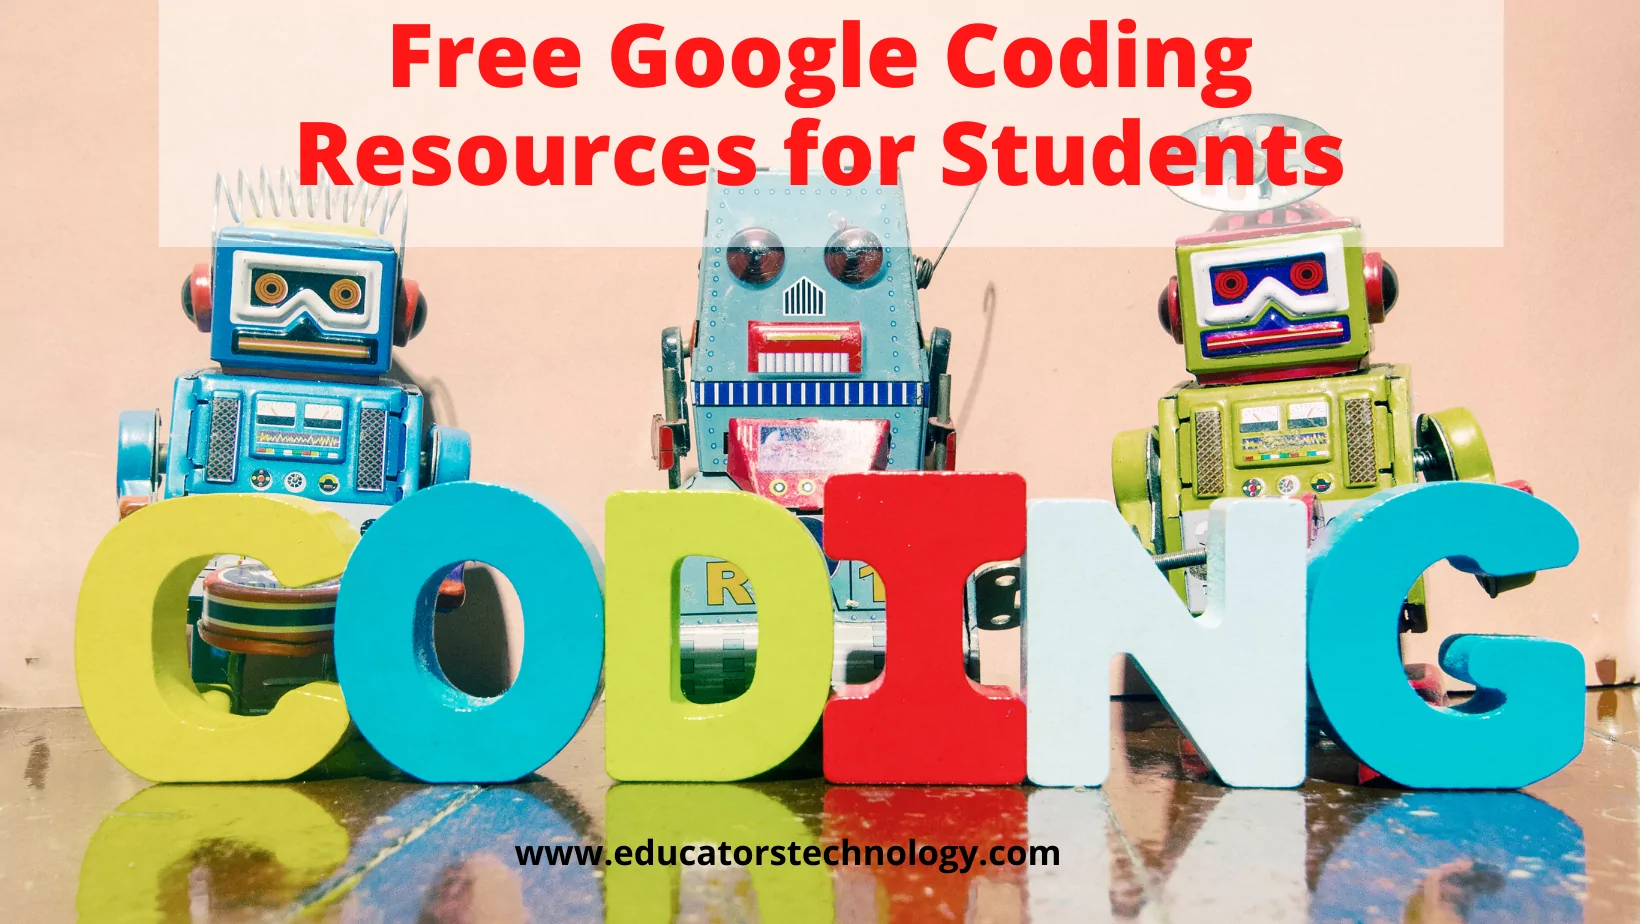 Free Google Coding resources for students